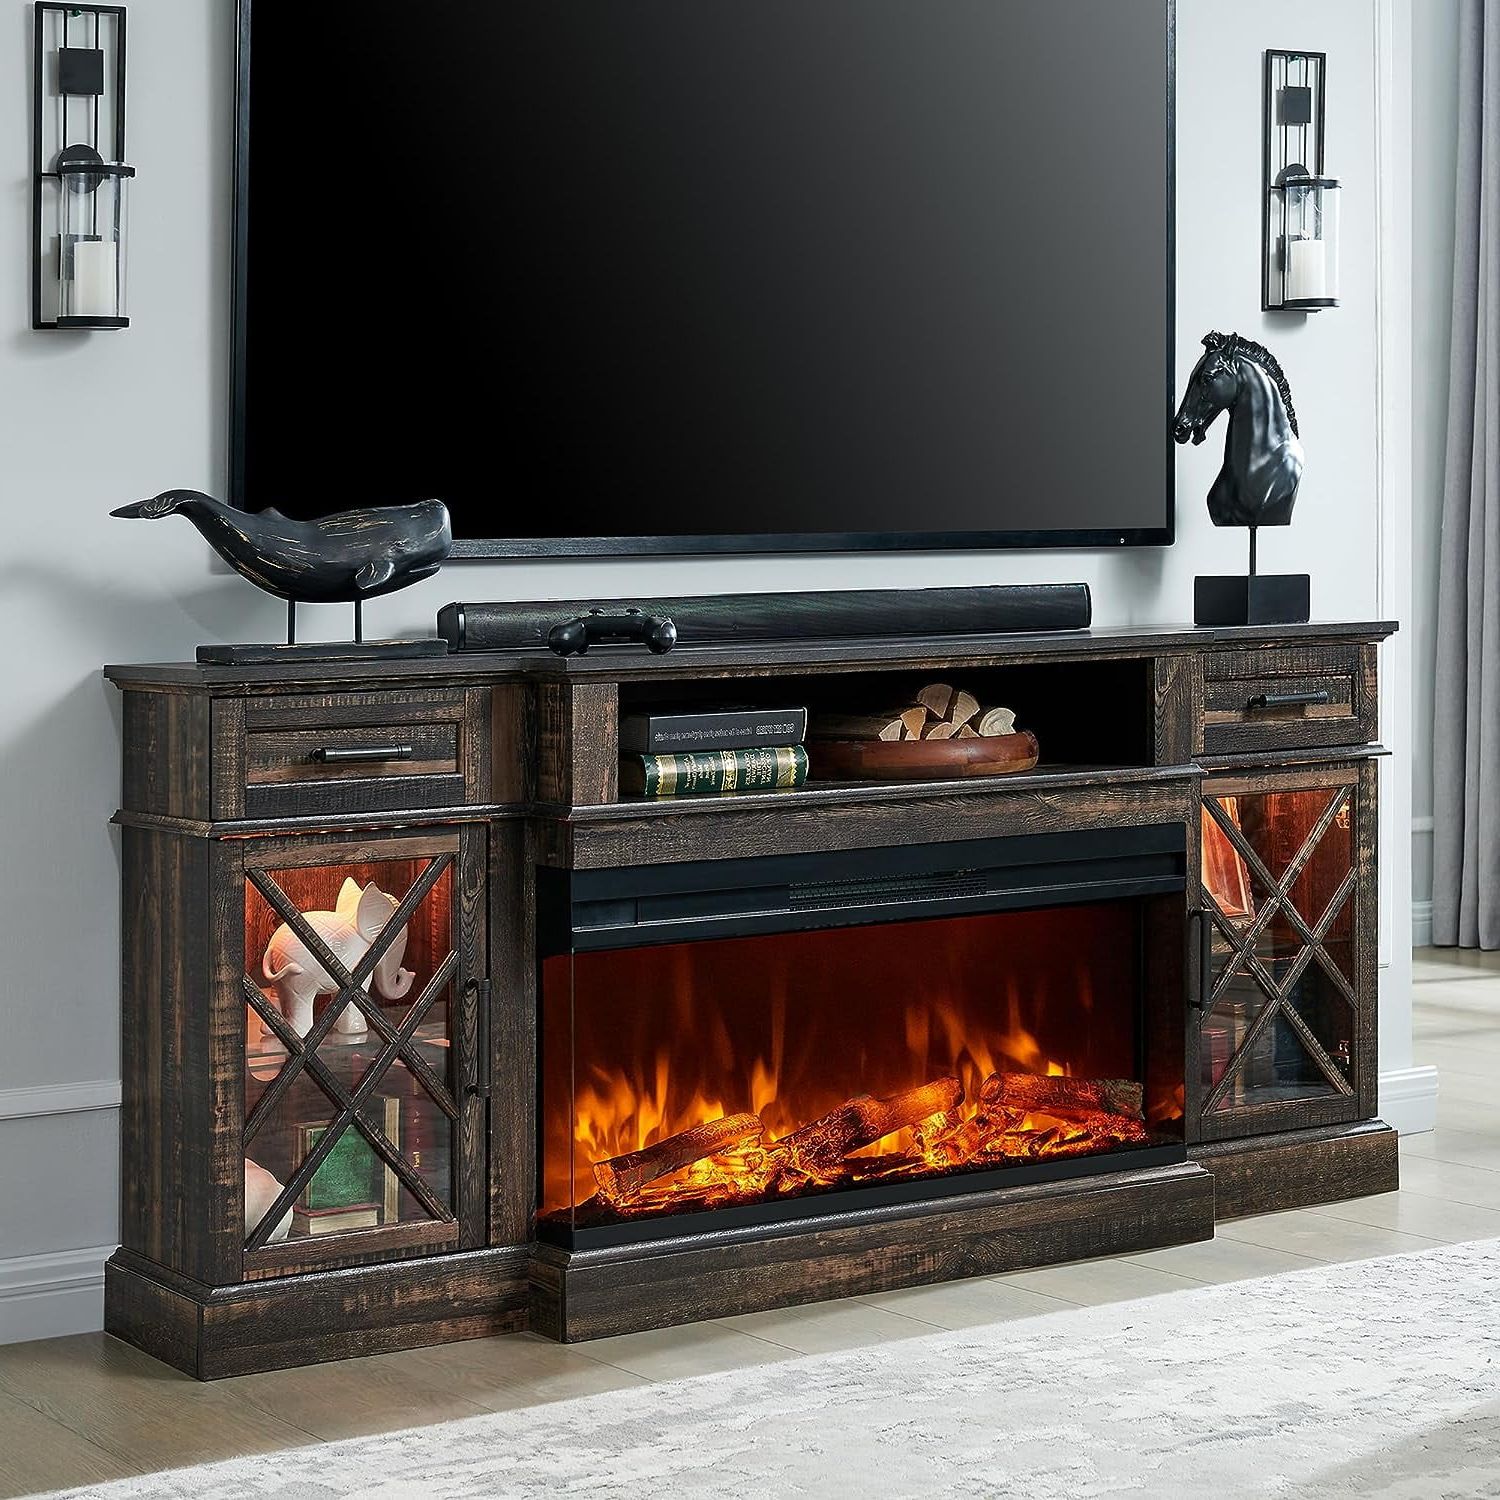 Okd 3 Sided Glass Farmhouse 70" Fireplace Tv Stand For Tvs Up To 80",  Highboy Entertainment Center With 36" Electric Fireplace, Dark Rustic Oak –  Walmart Inside Tv Stands With Electric Fireplace (View 12 of 20)